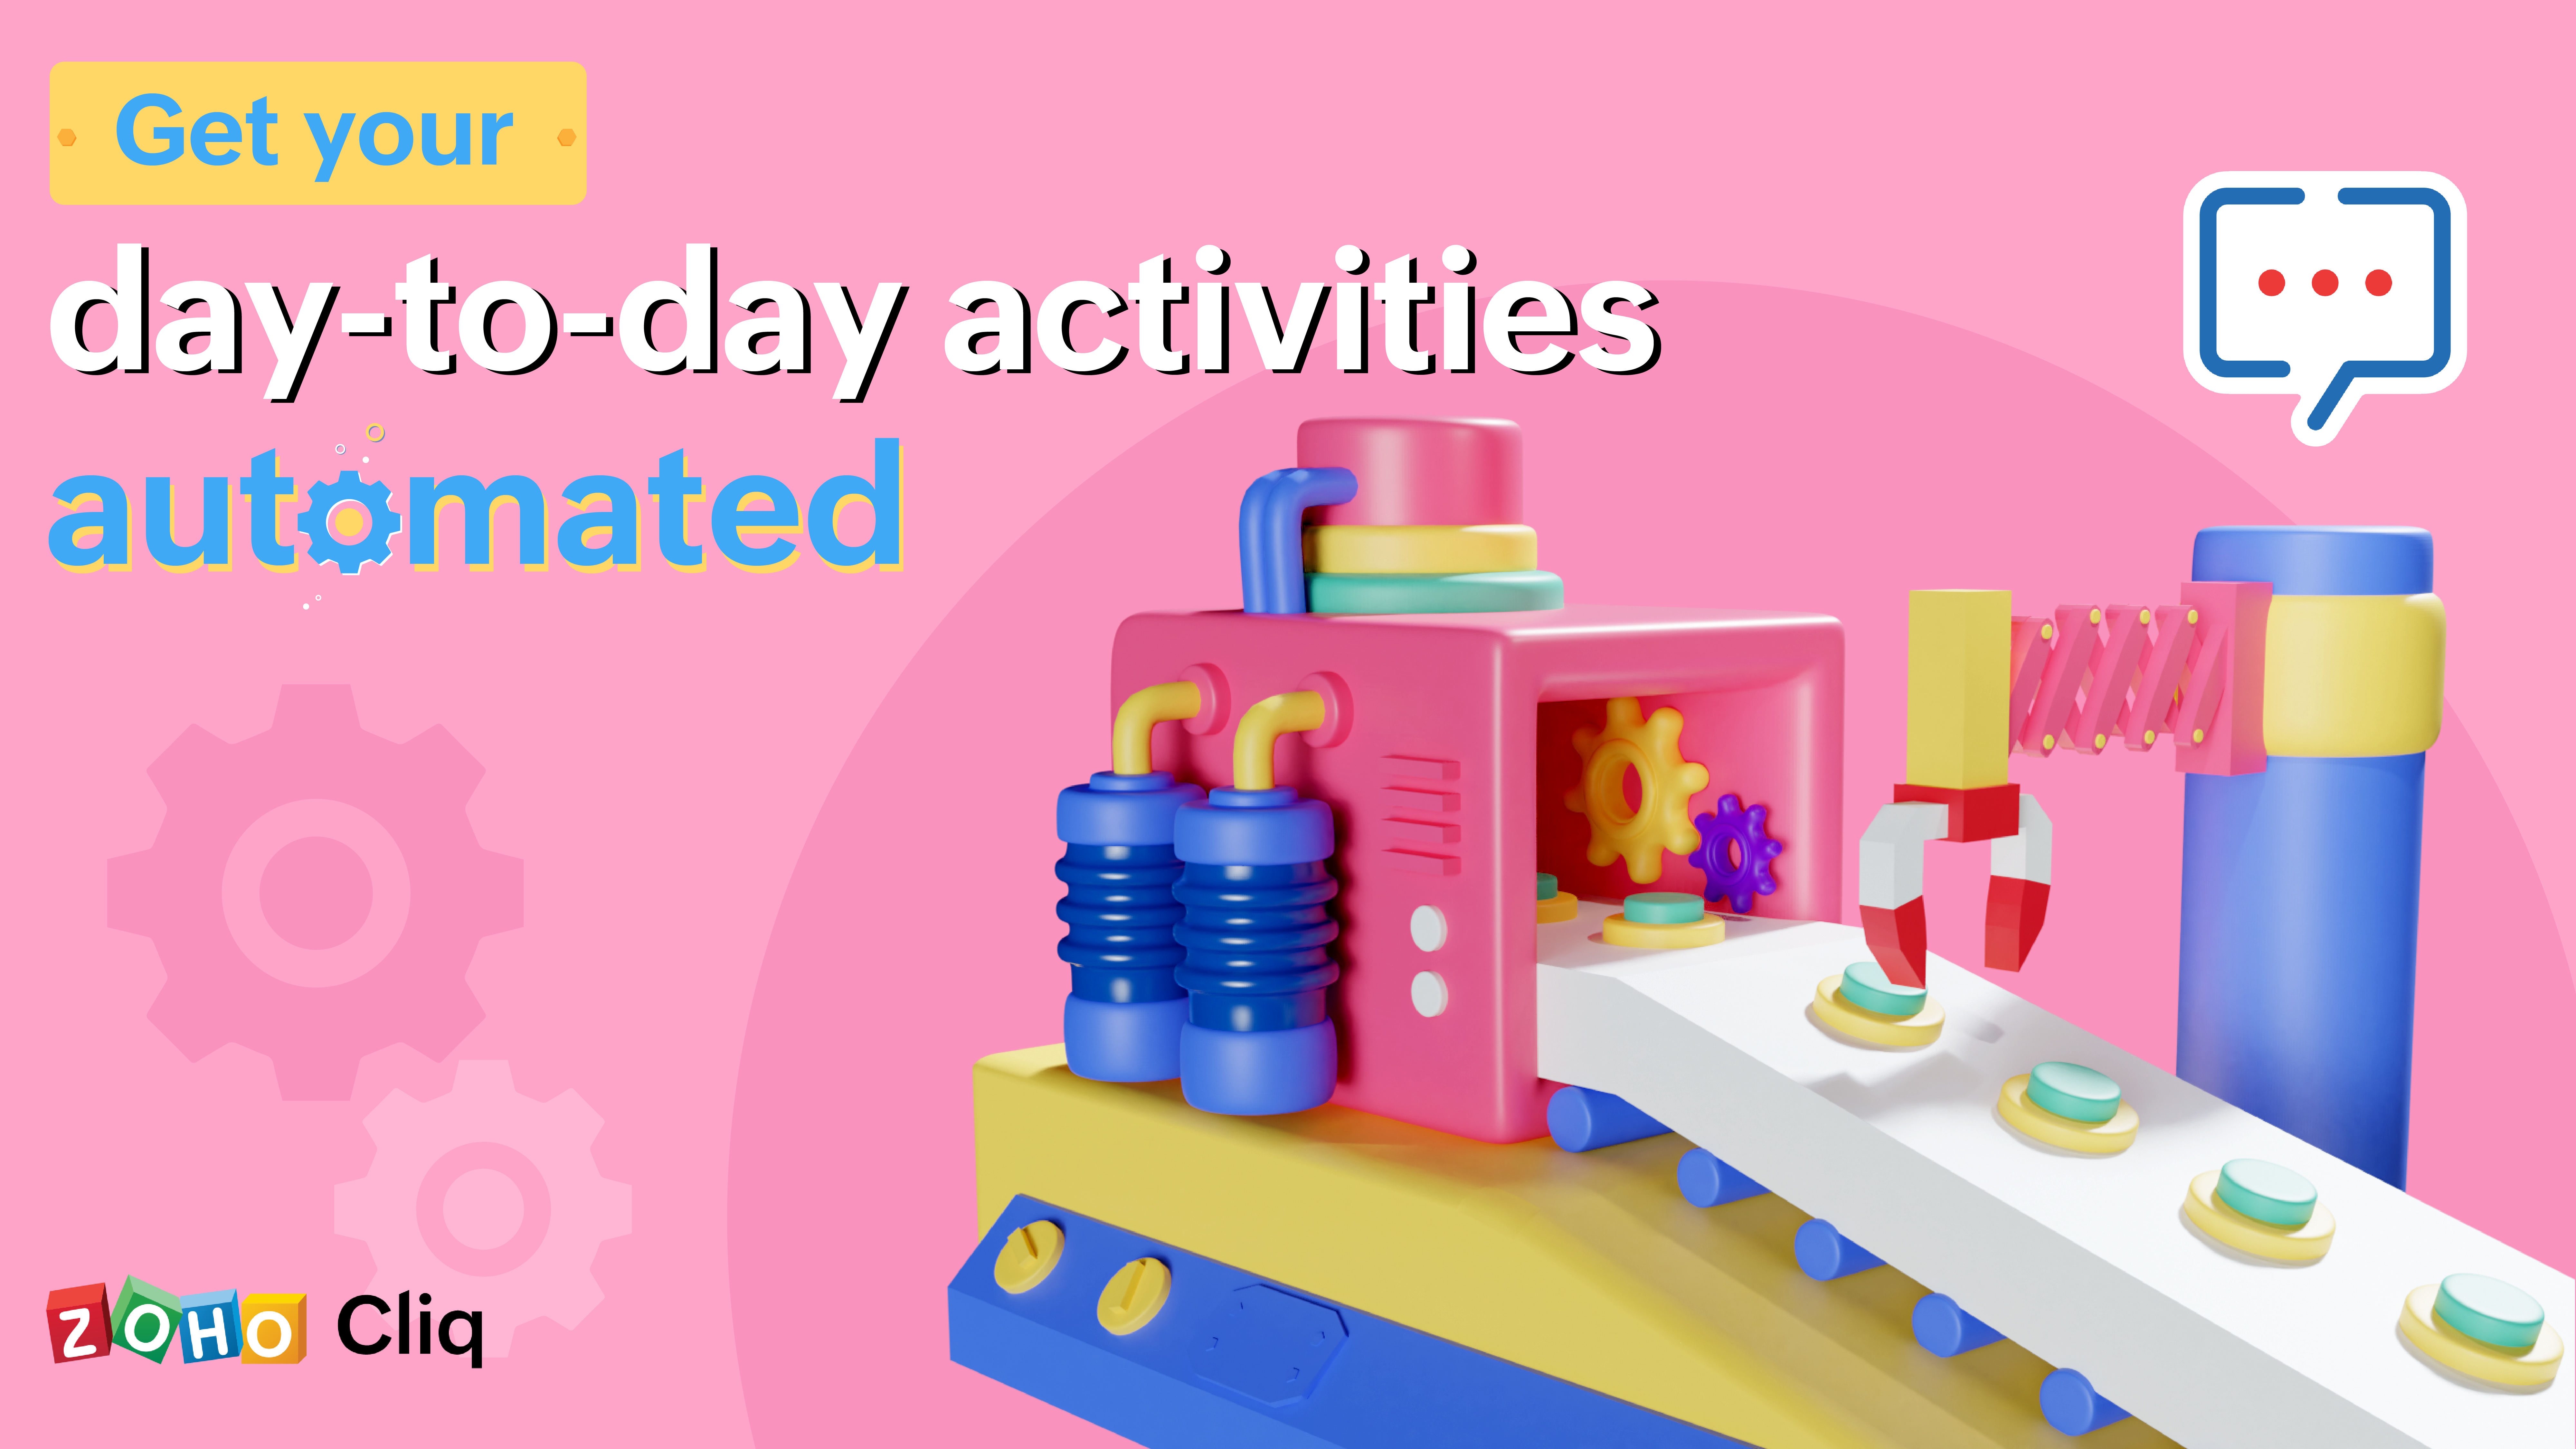 Automating your day-to-day activities: Why it’s helpful and how you can do it